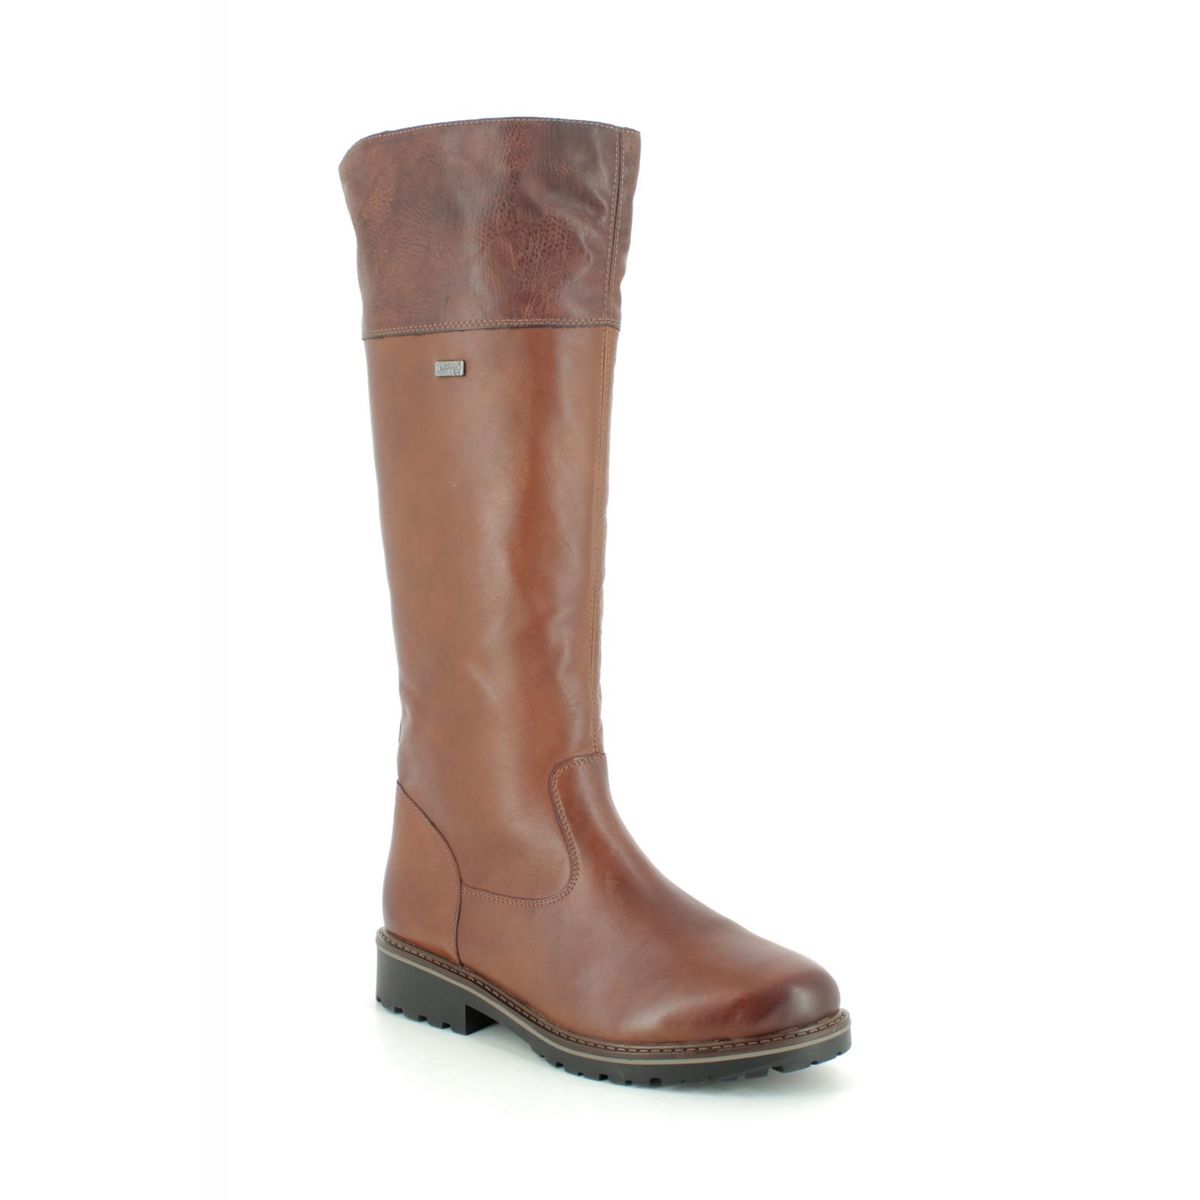 Remonte Indah Tex Tan Leather  Womens Knee-High Boots R6581-22 In Size 37 In Plain Tan Leather